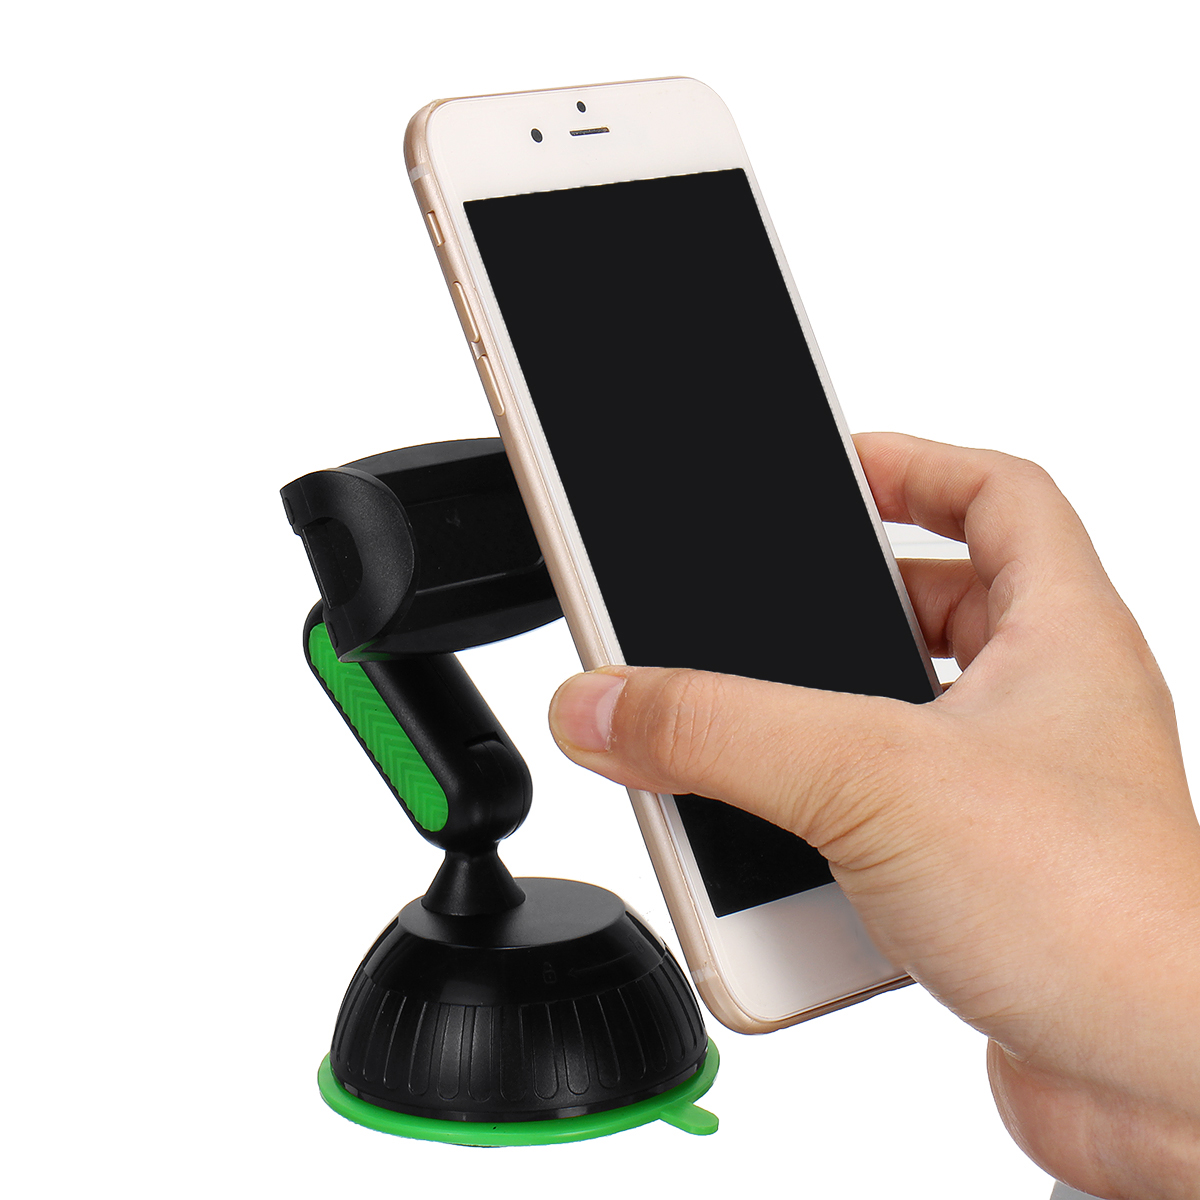 Adjustable-Arm-One-Click-Release-Car-Dashboard-Suction-Cup-Bracket-Mobile-Phone-Holder-Stand-for-4-7-1844270-5